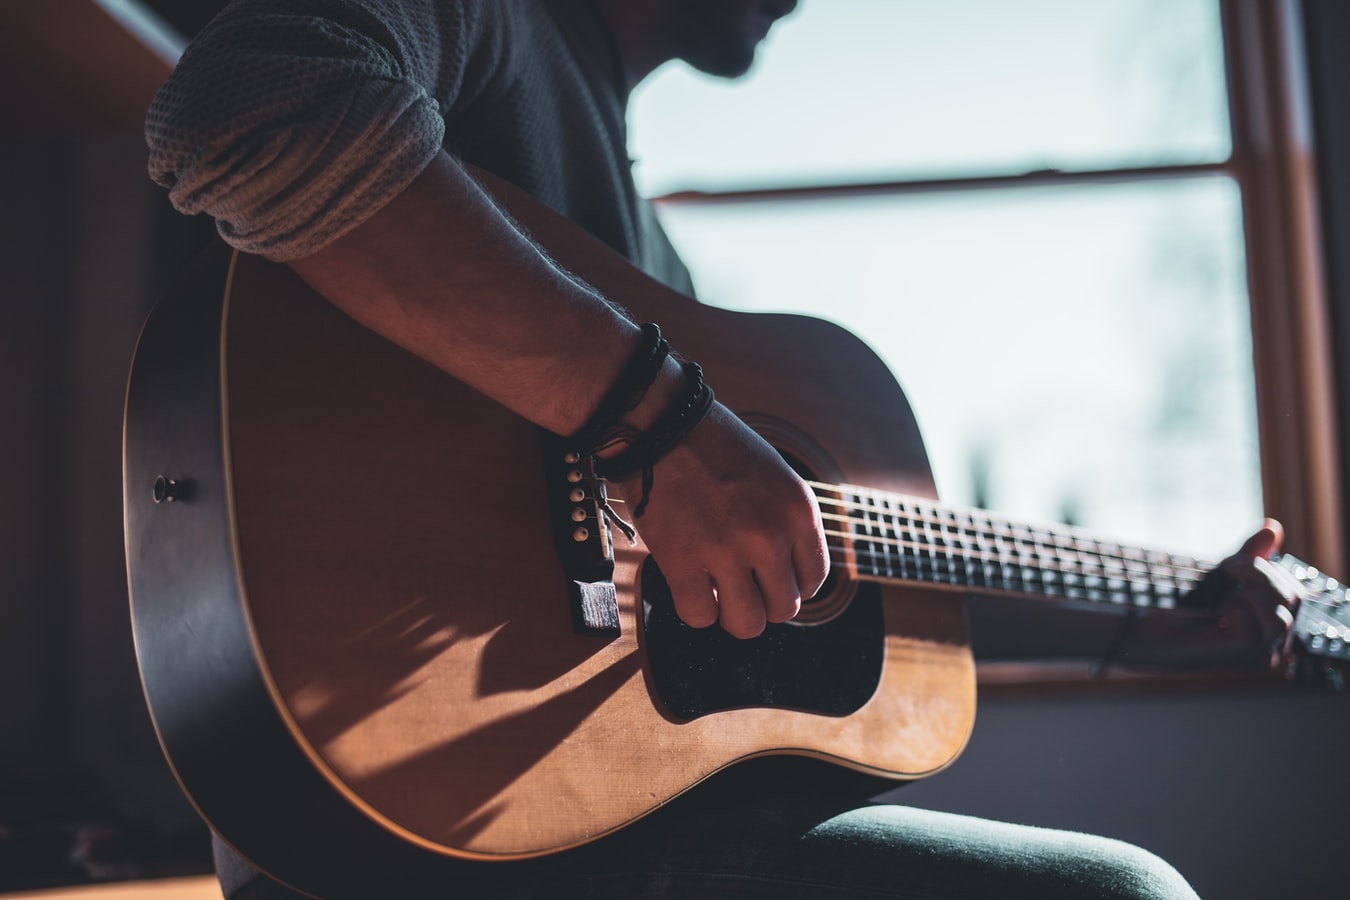 Learn guitar whilst isolated at home with free lessons, tips, and tricks for beginners to pros